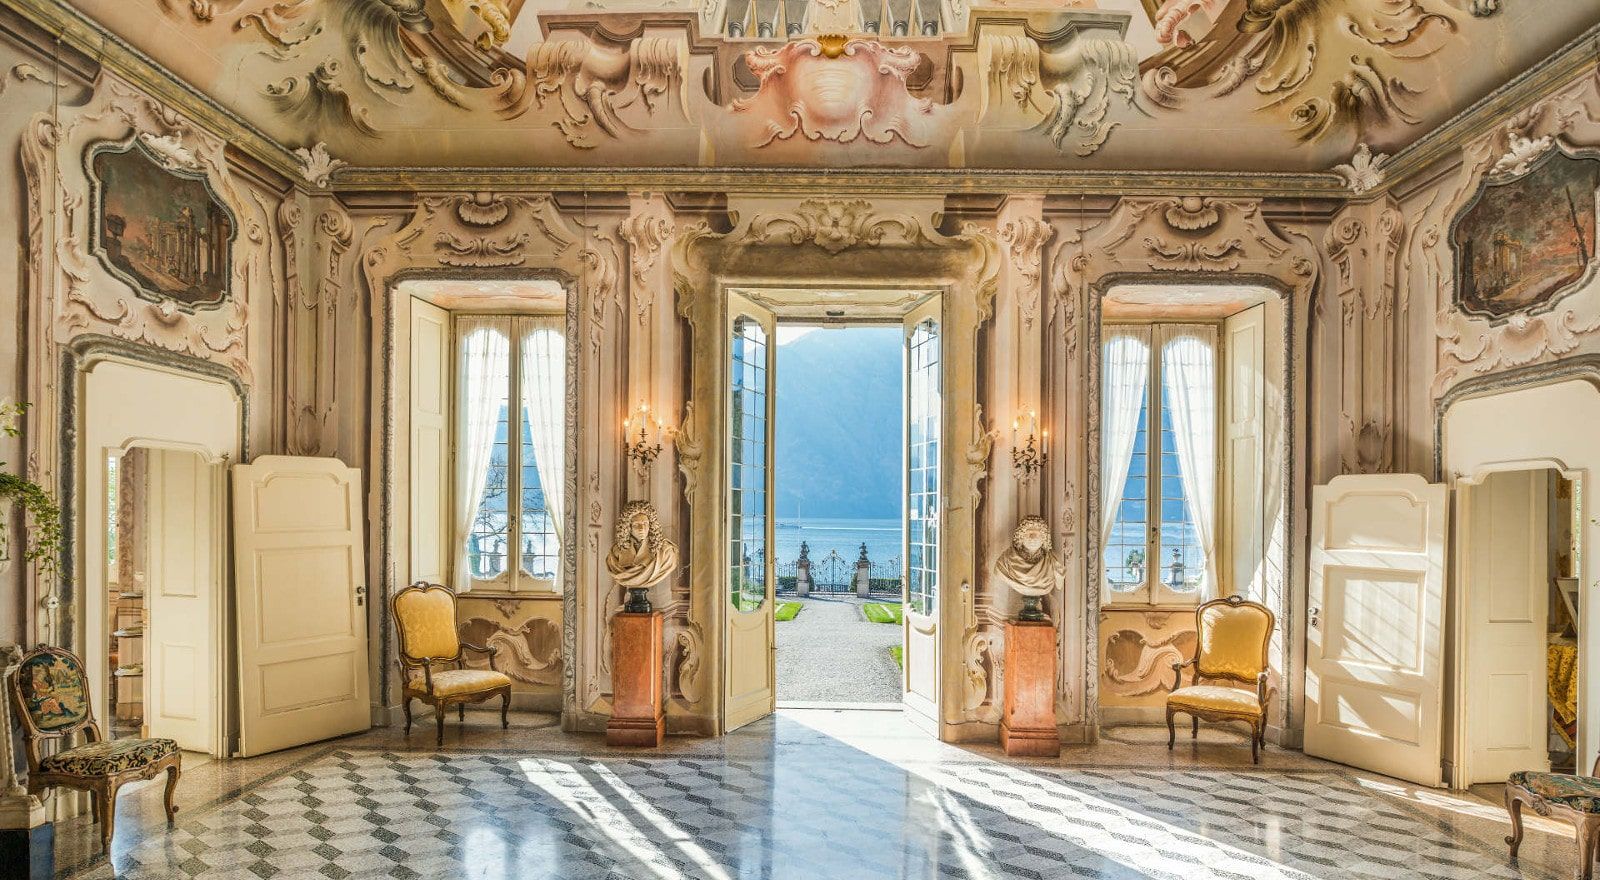 Inspired by #DeepVeer’s Lake Como wedding? Here’s our pick of five stunning venues there